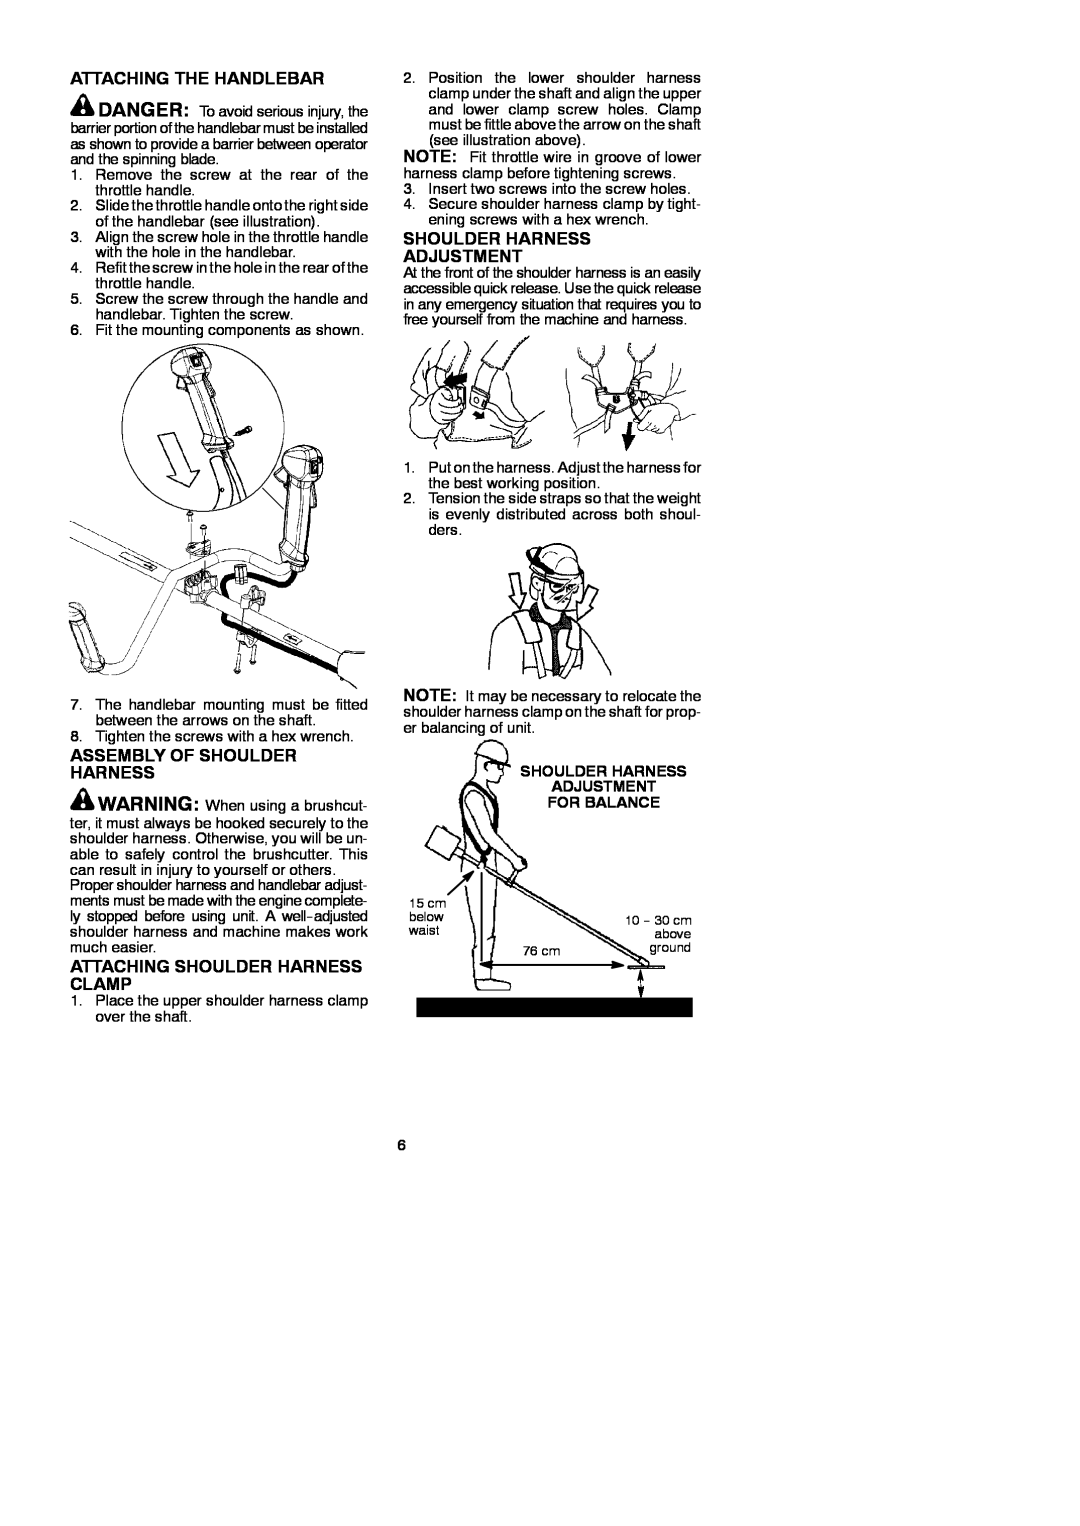 McCulloch 250 B instruction manual Attaching The Handlebar, Shoulder Harness Adjustment, Assembly Of Shoulder Harness 